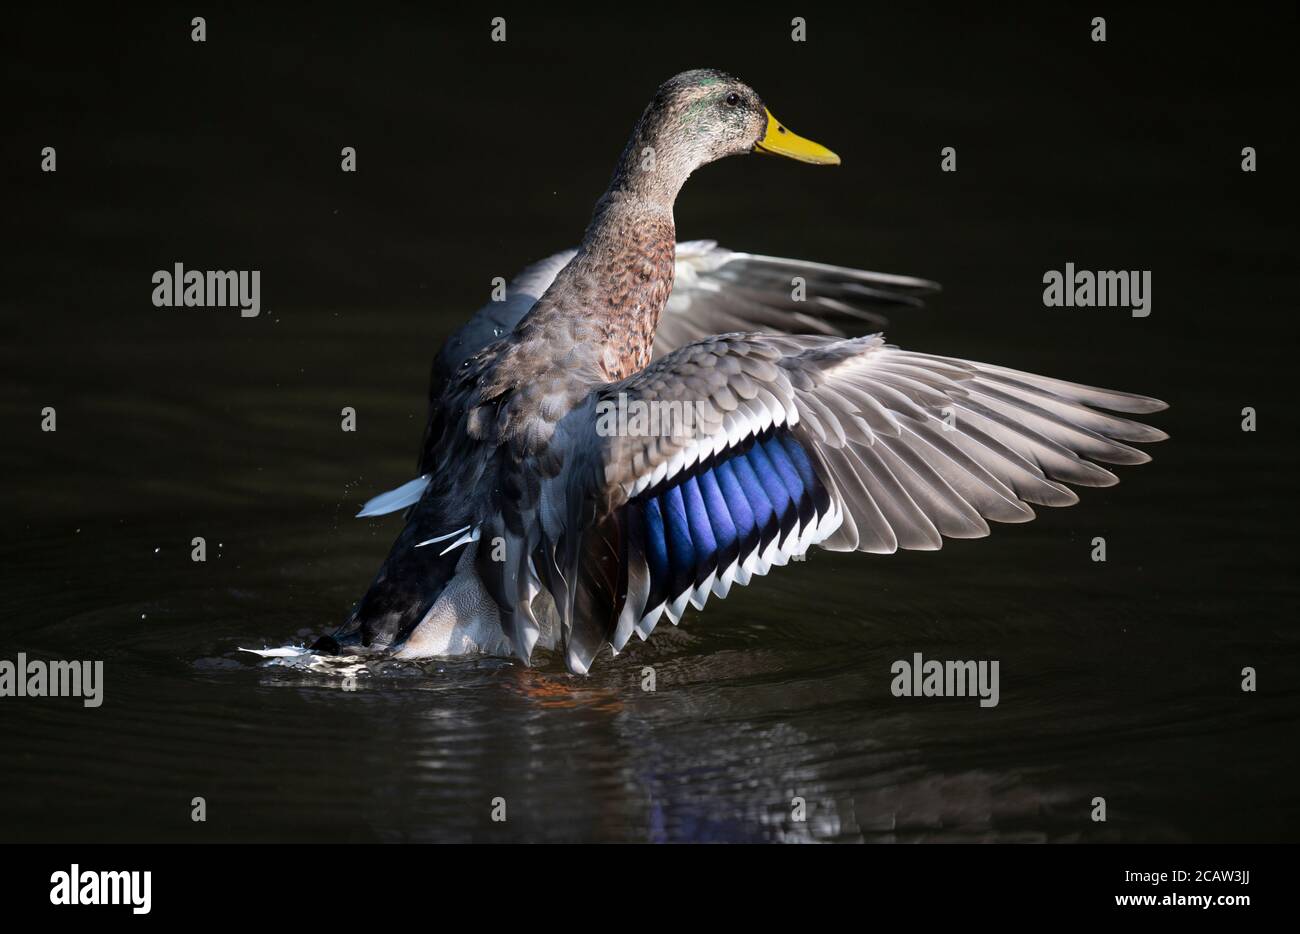 Stockport, UK. 9th August 2020. A mallard hen lands on the water in Bramhall Park as temperatures are expected to reach above 30 degrees centigrade in parts of the UK. © Russell Hart/Alamy Live News. Stock Photo